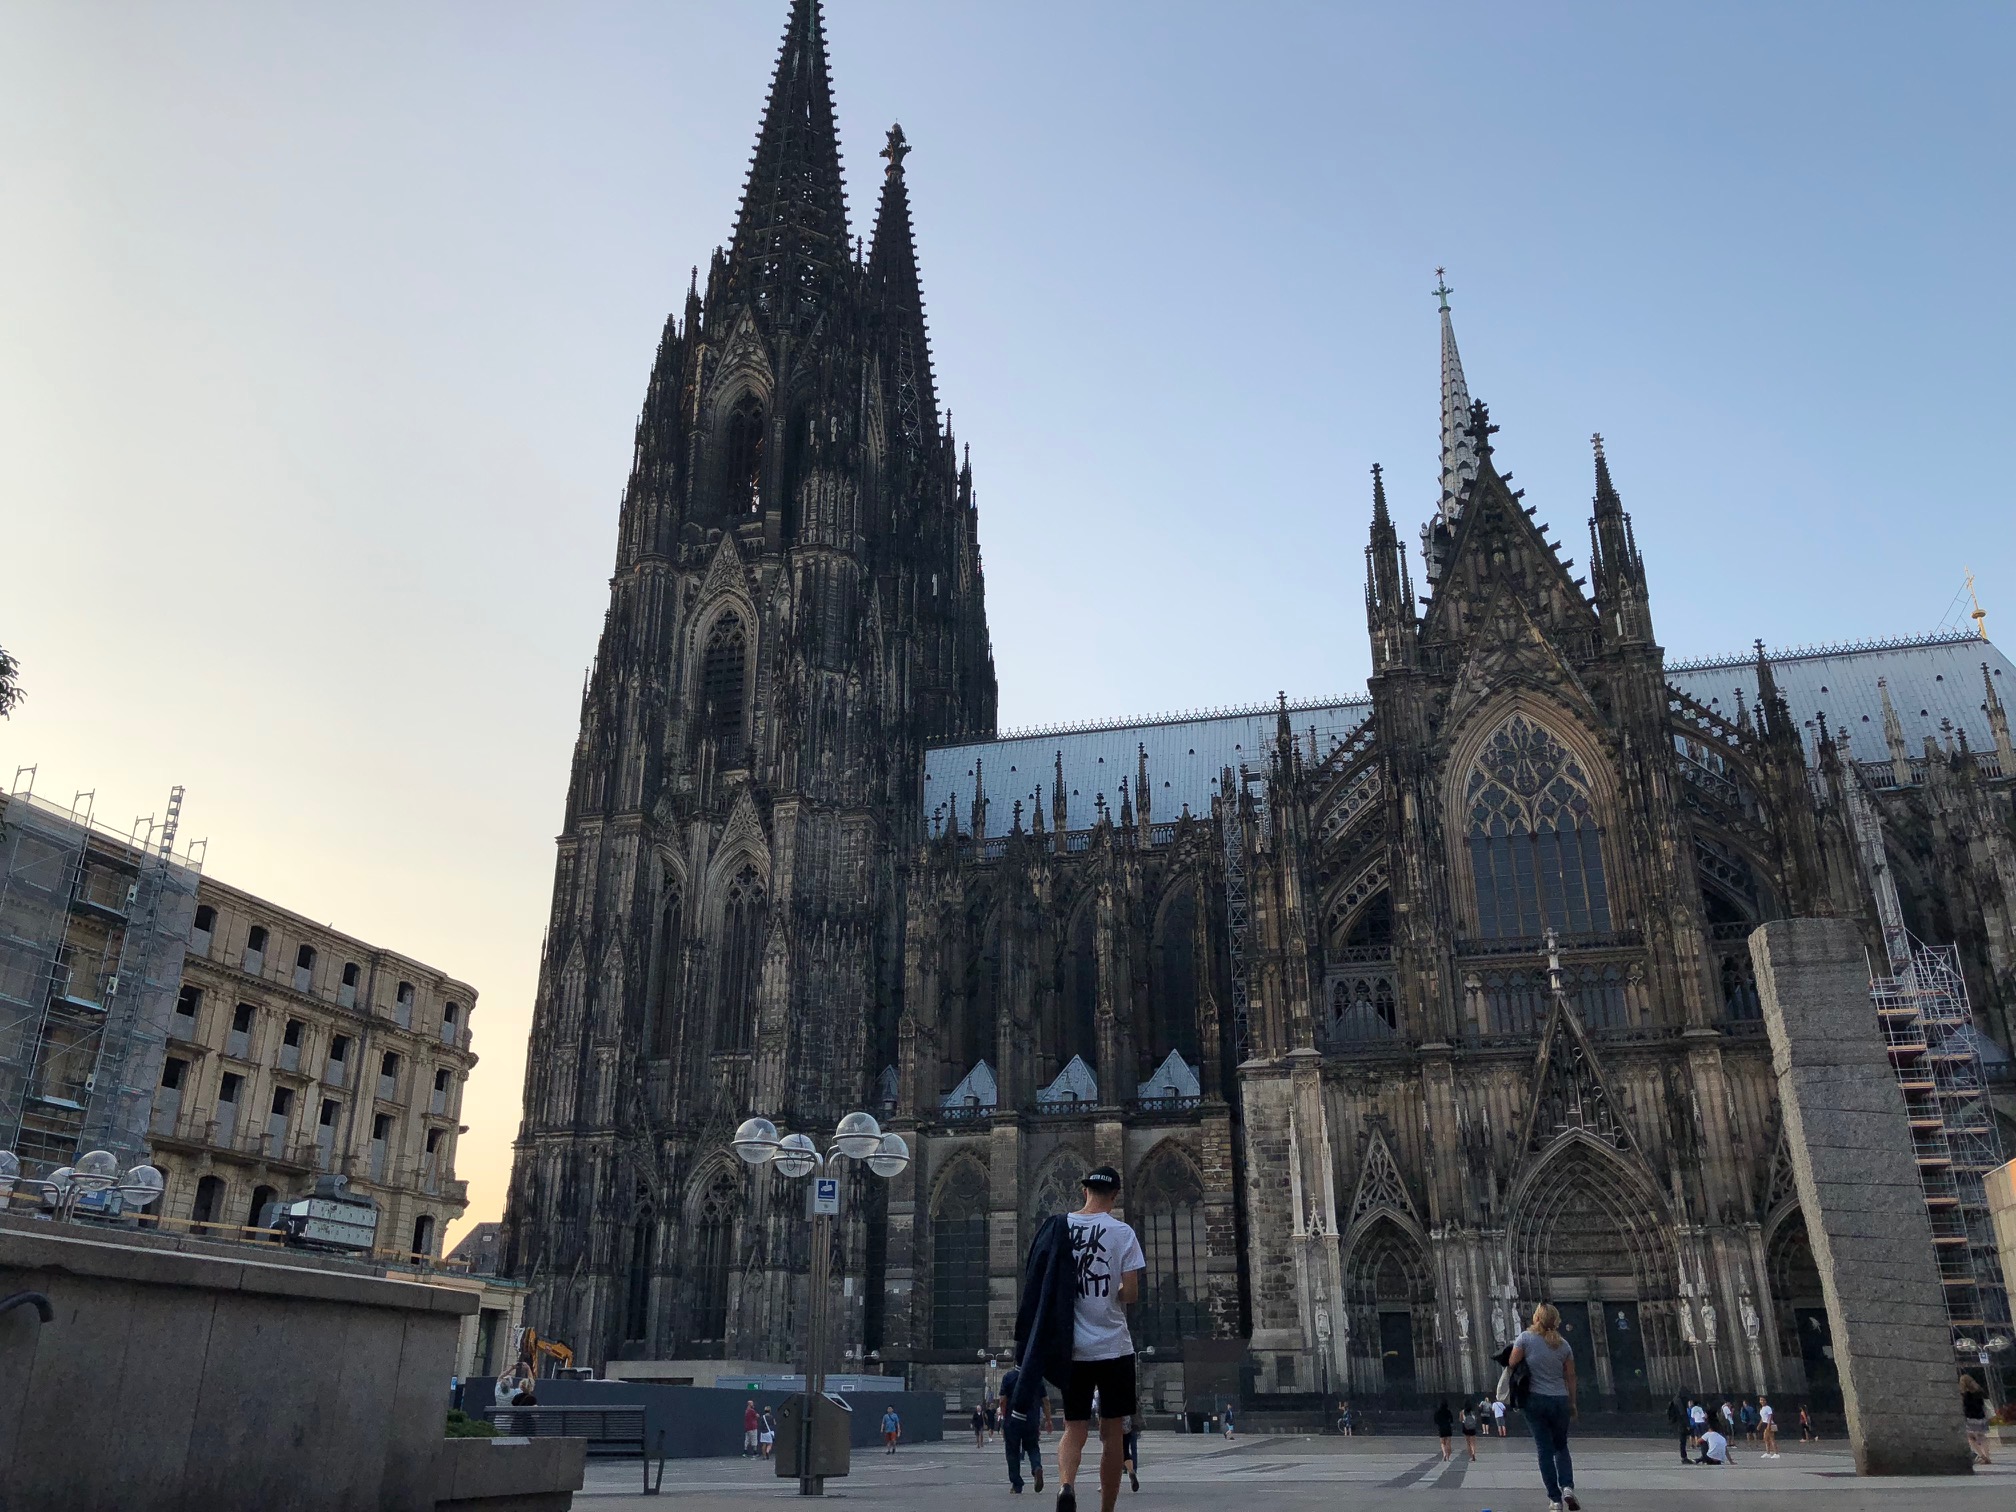 The square on the south side of the Cologne cathedral